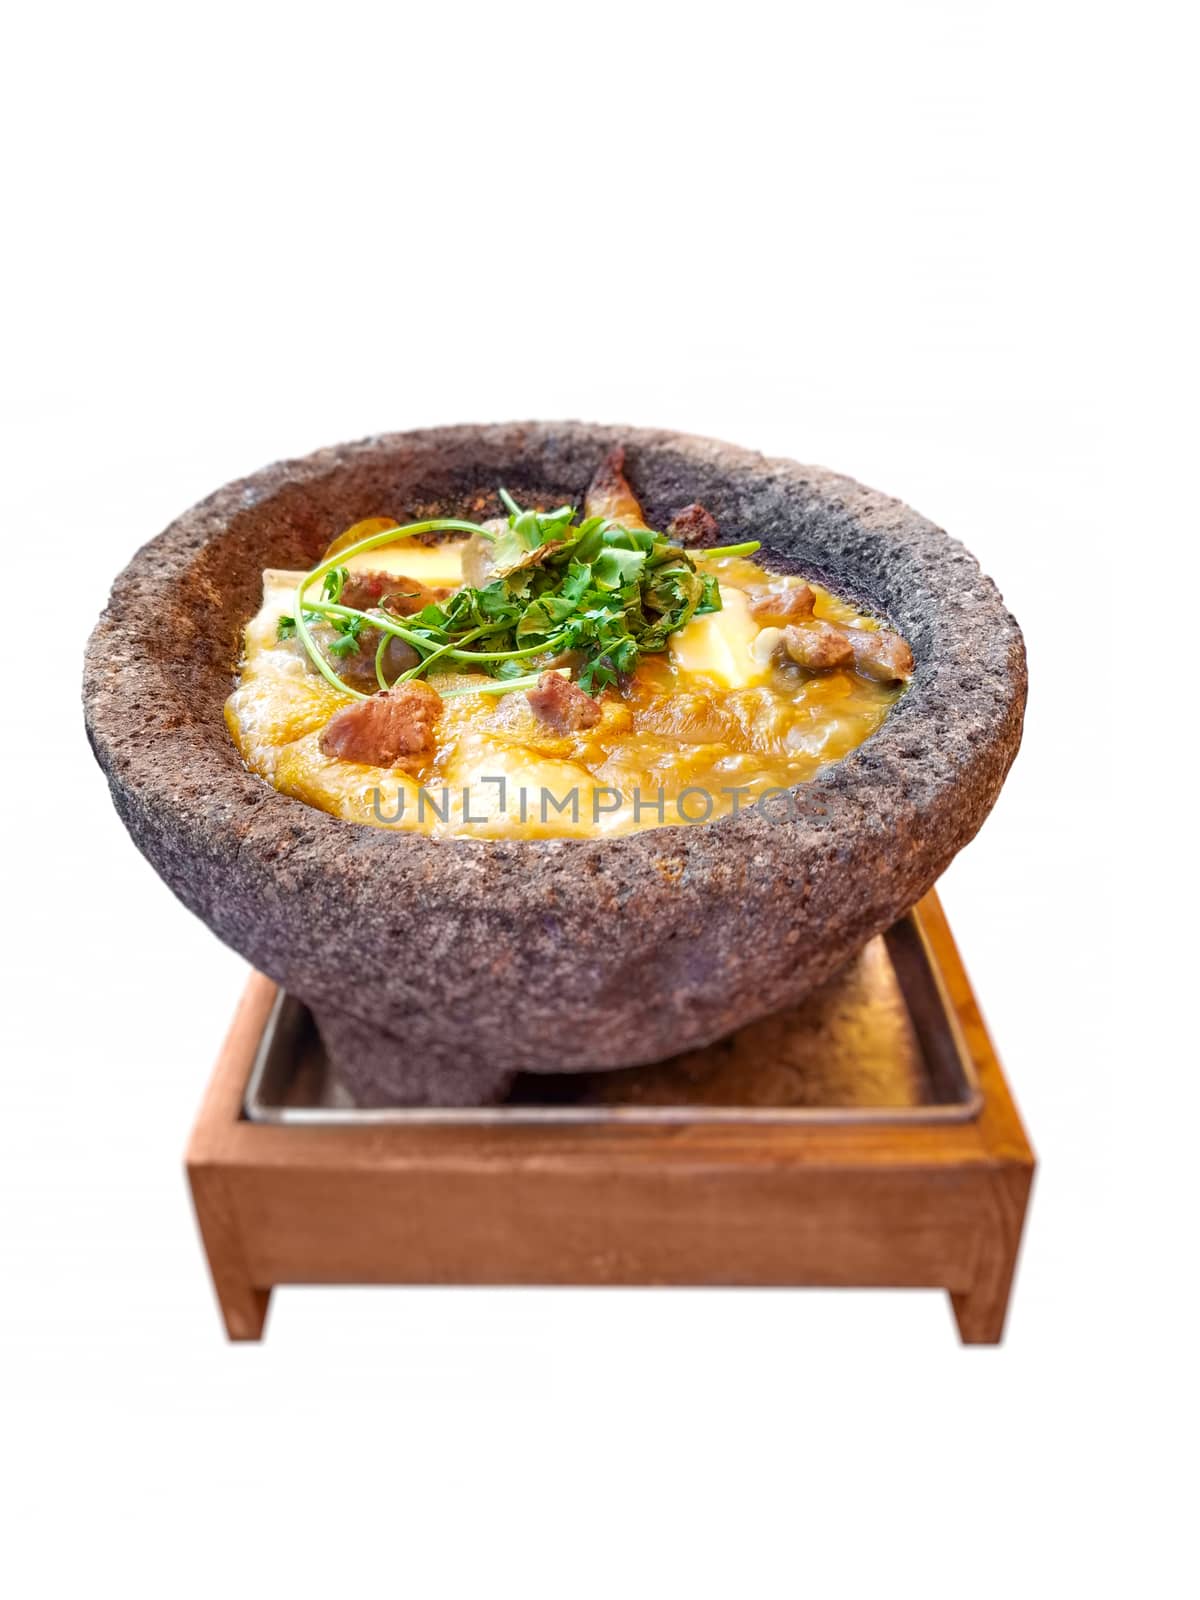 Molcajete isolated over white background. Molcajete is a traditional Mexican stone tool, and it's used for preparation and serving of different kinds of food.